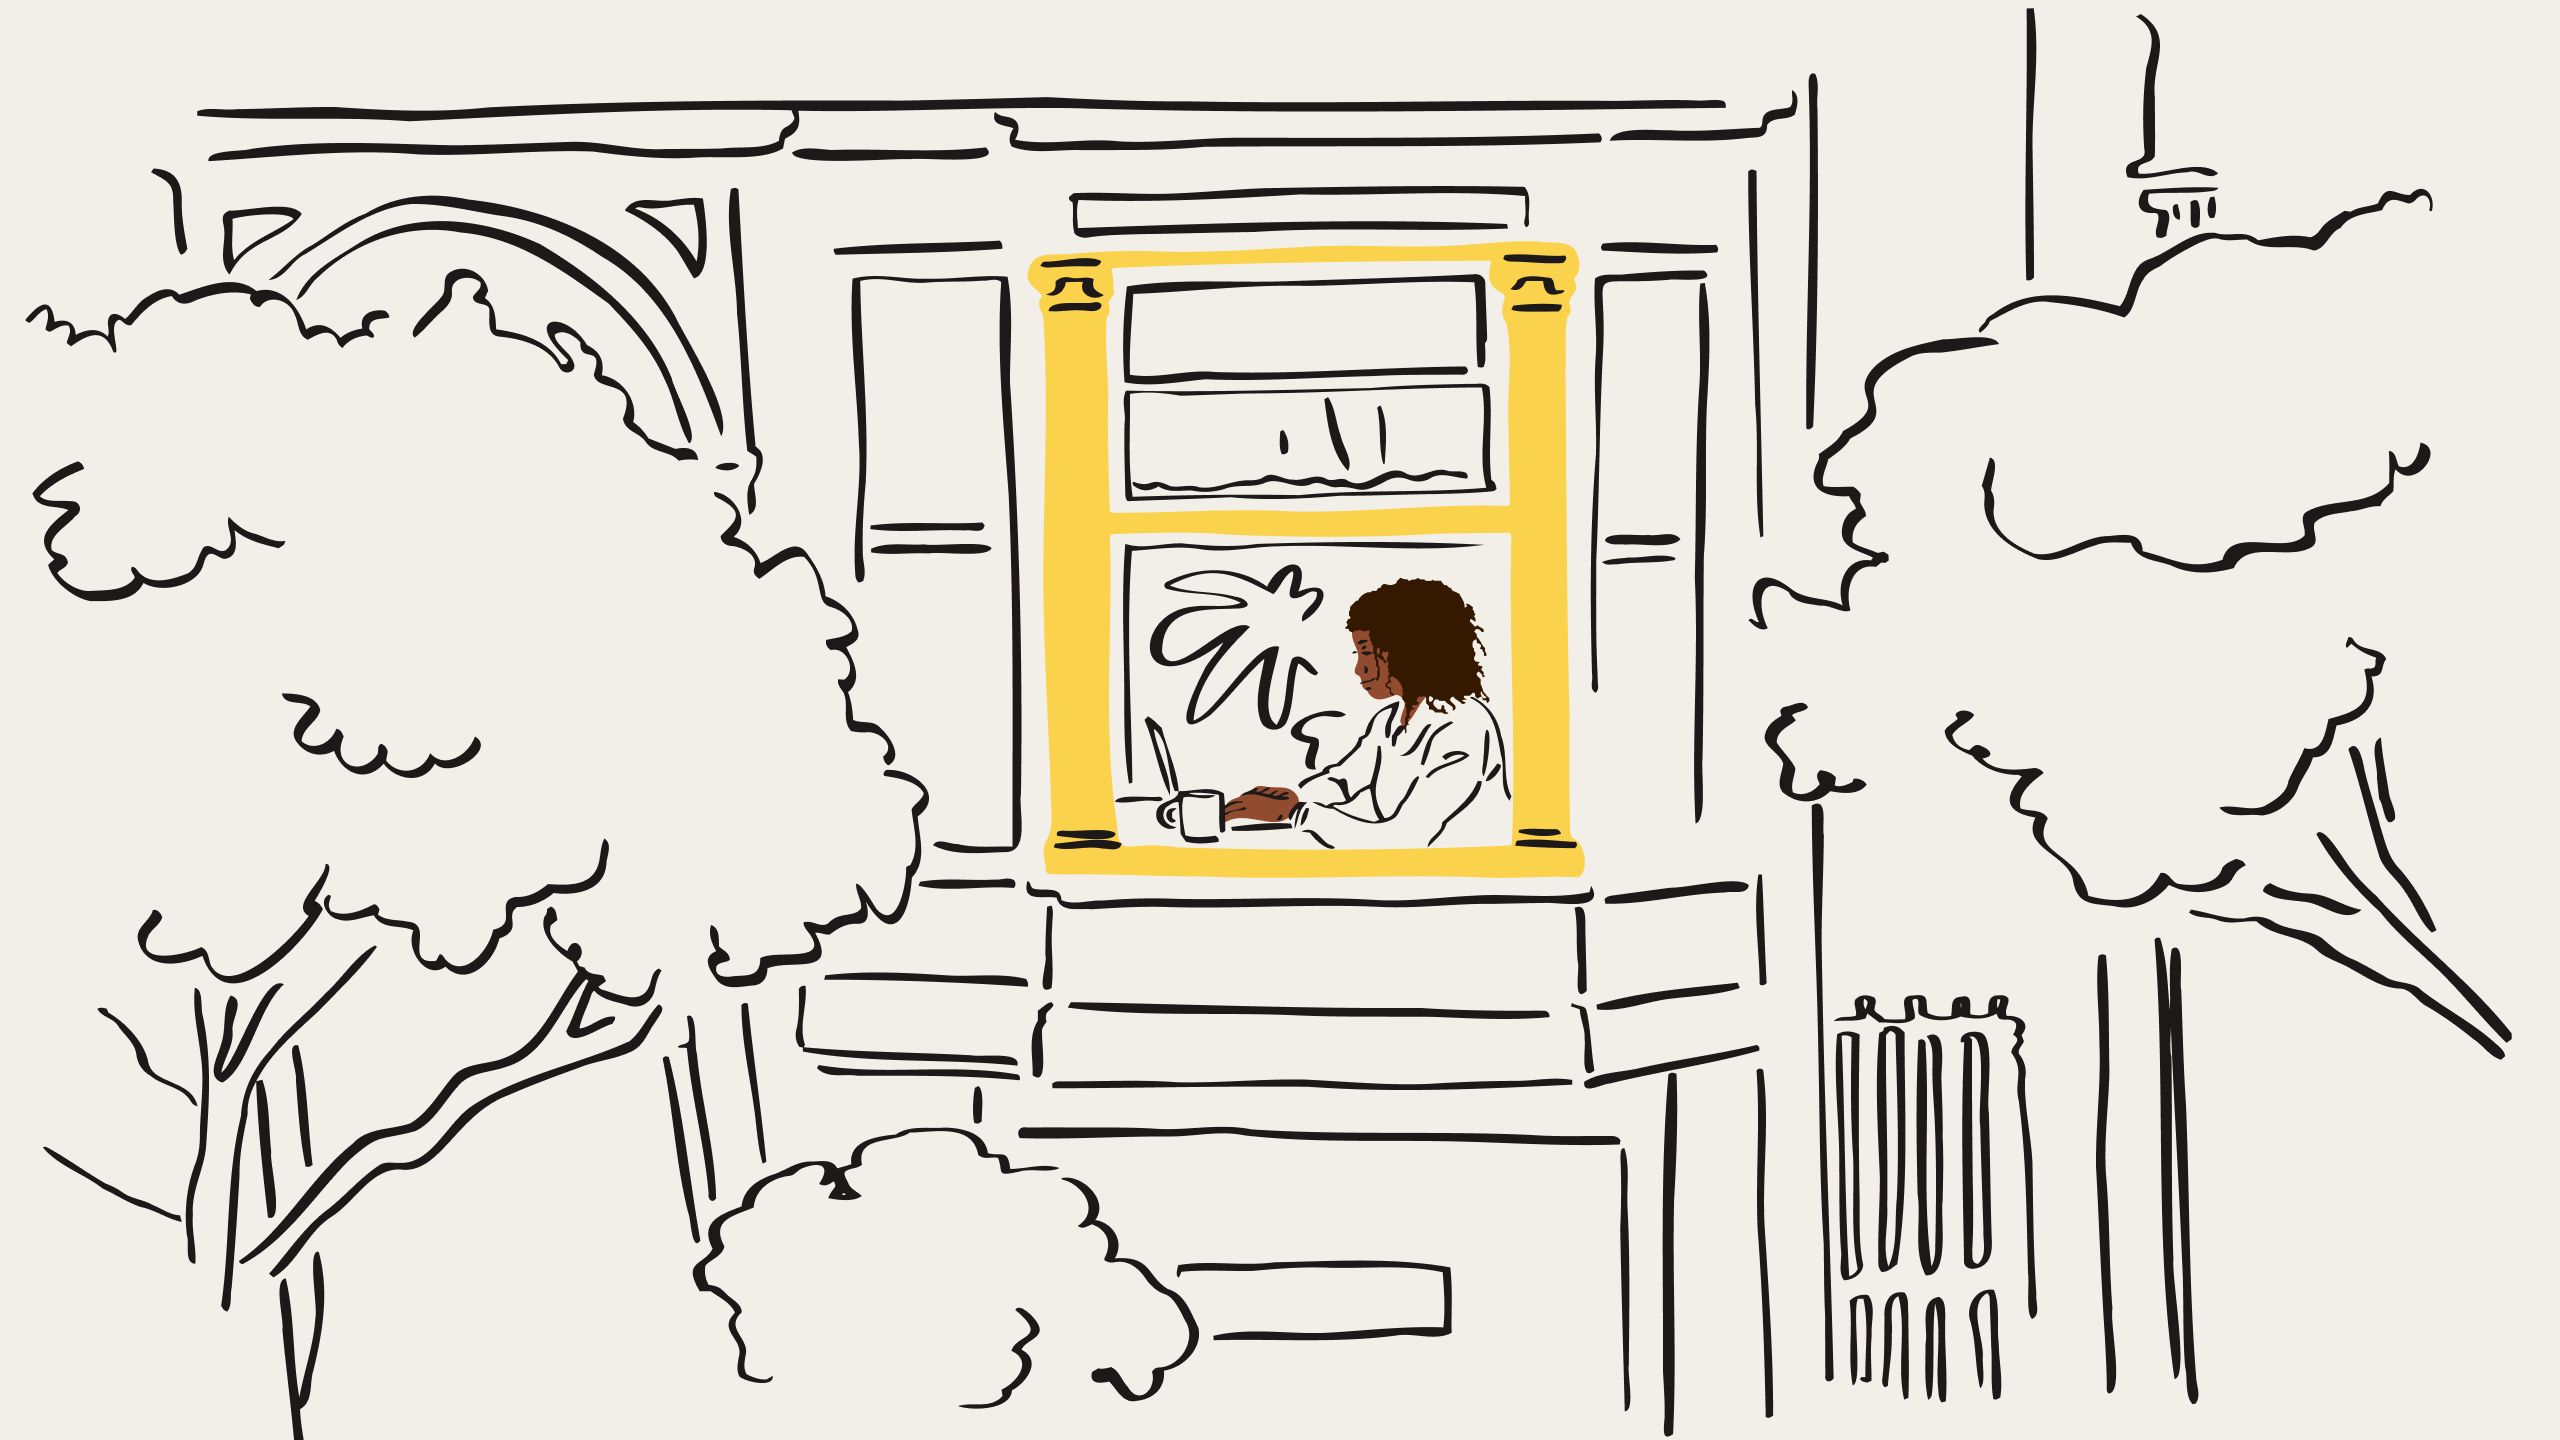 An illustration showing a person sitting in the window of an apartment building, looking at their laptop